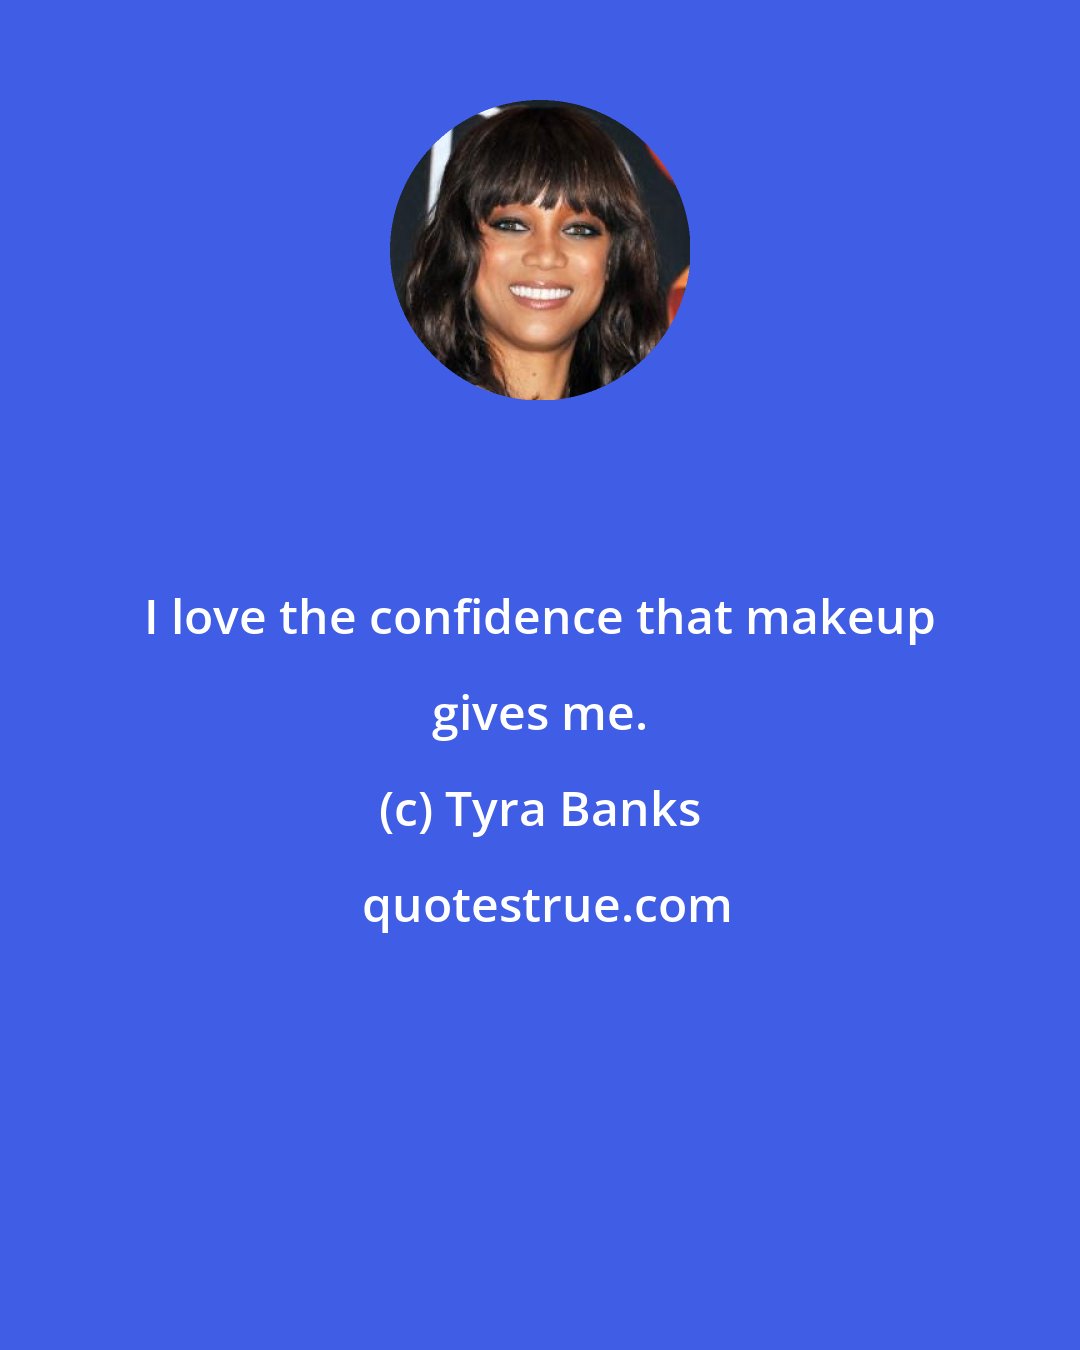 Tyra Banks: I love the confidence that makeup gives me.